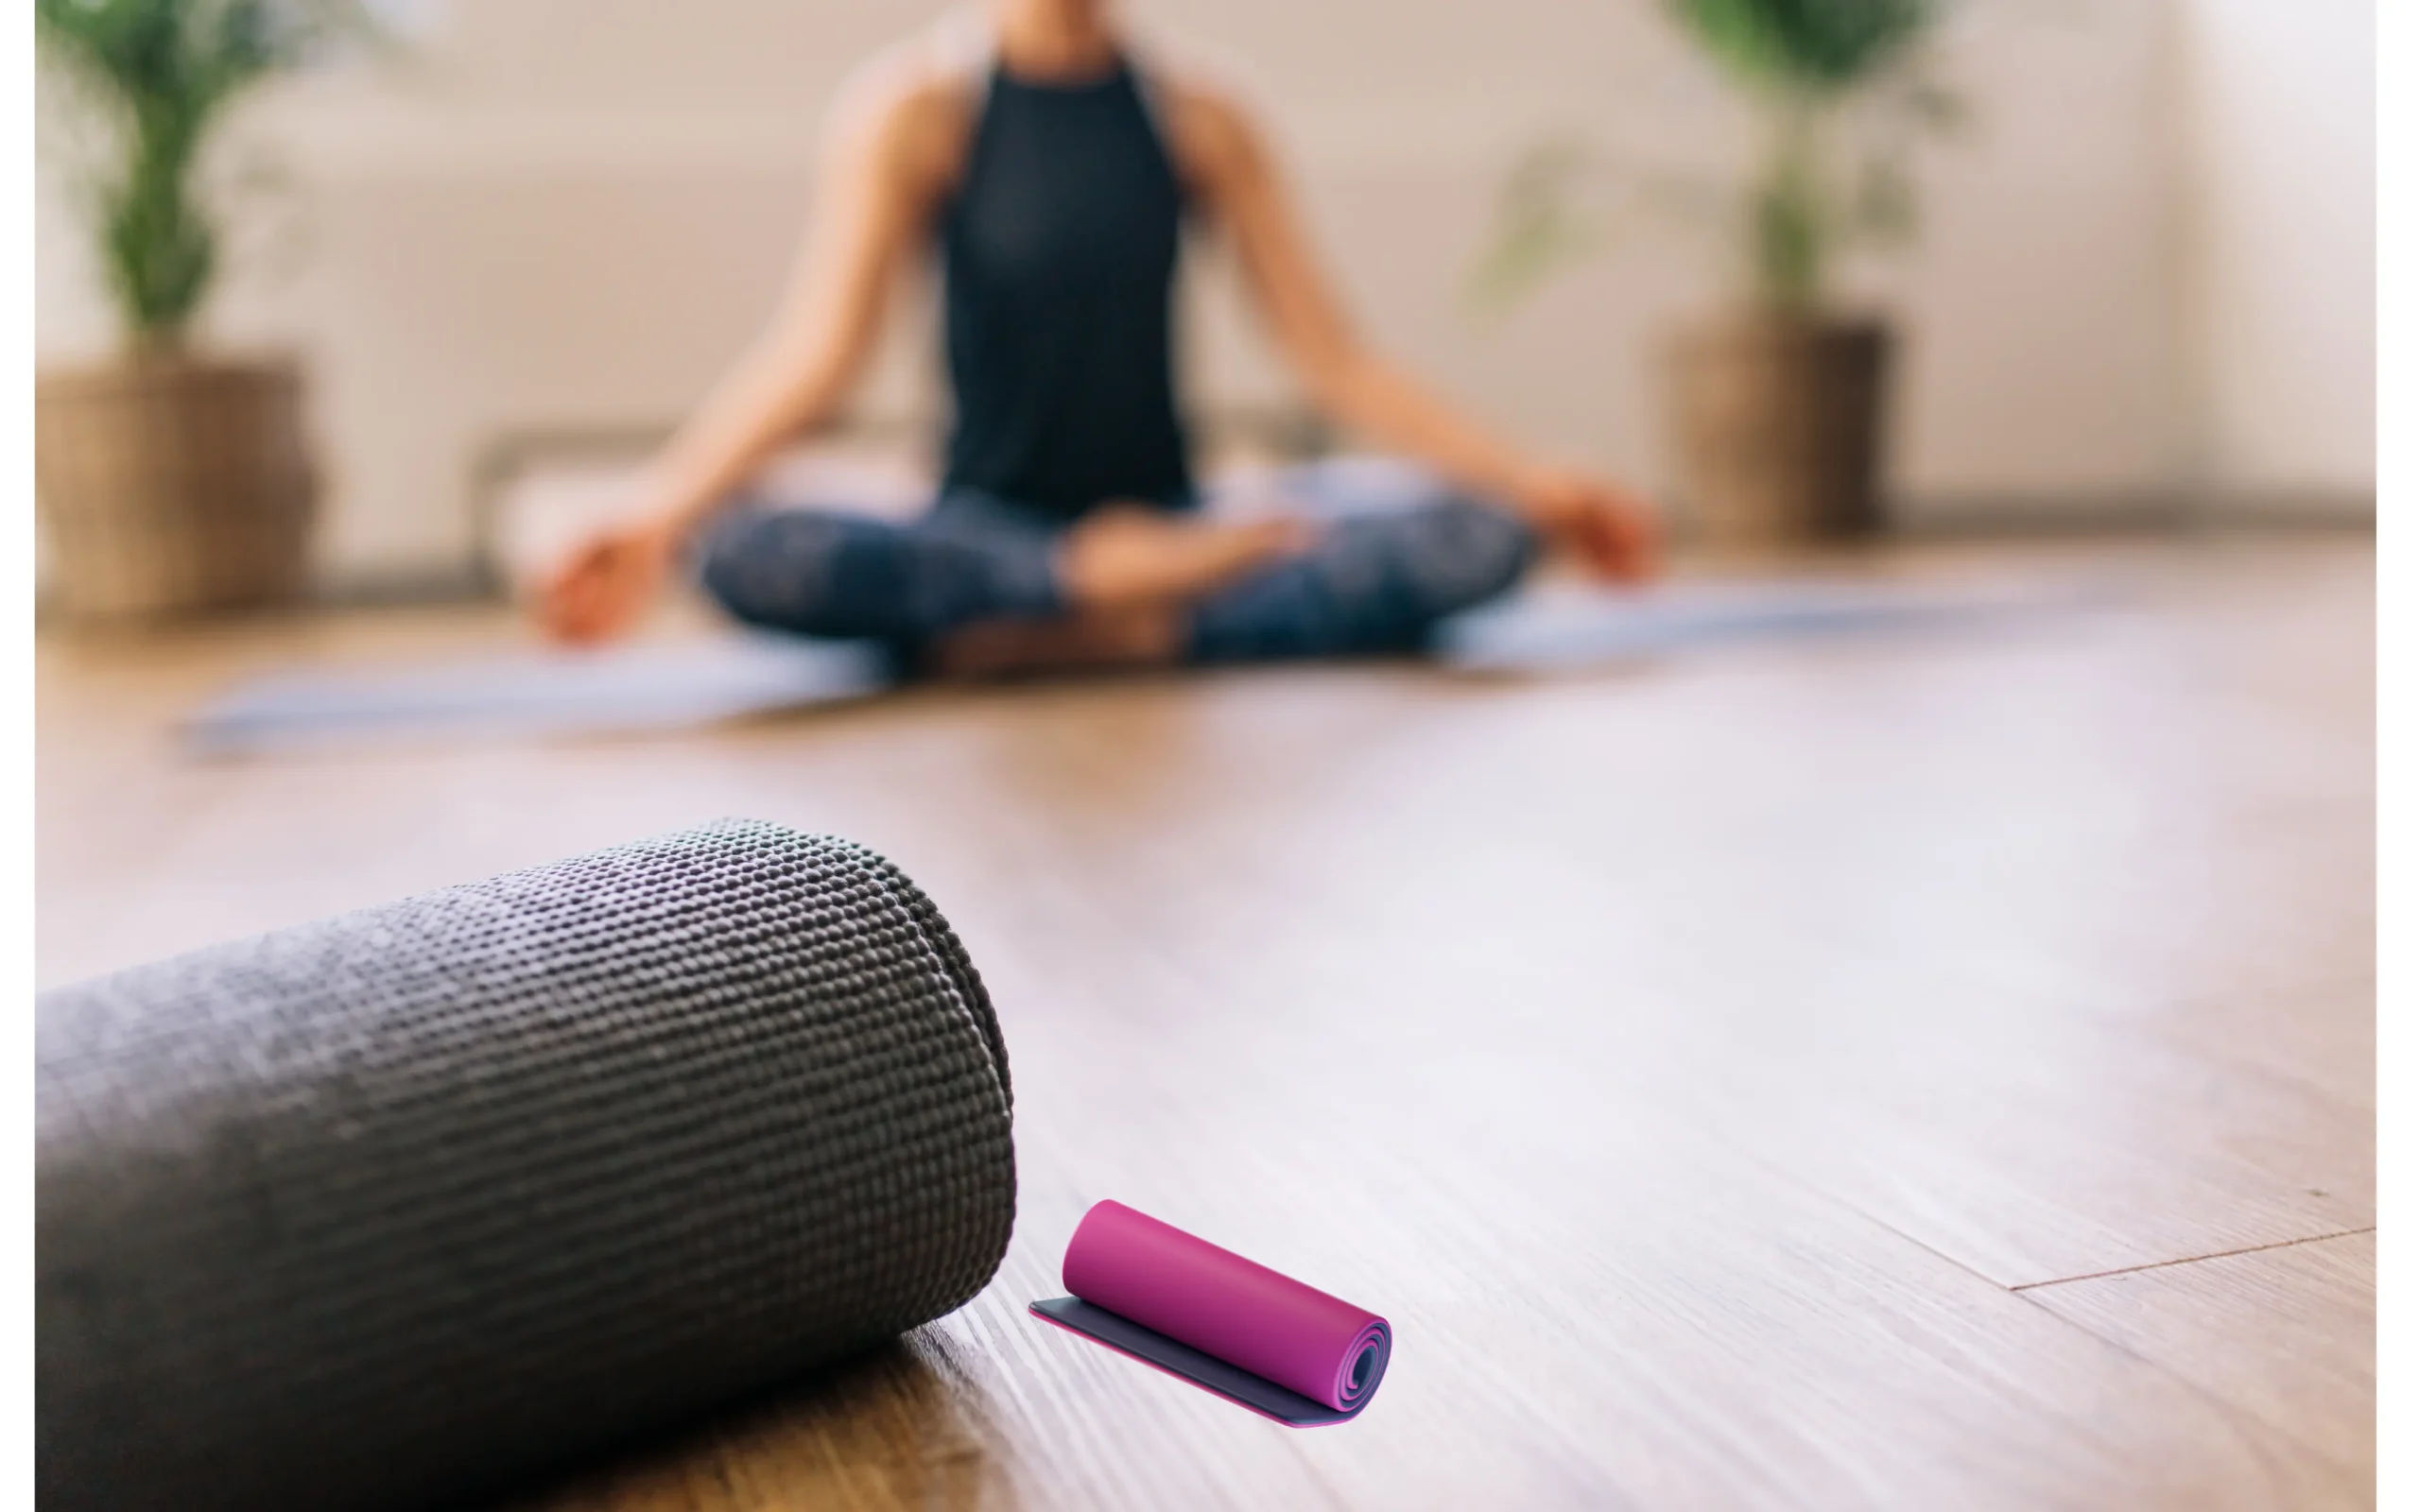 Choosing the great Yoga style and Yoga Mat for your practice